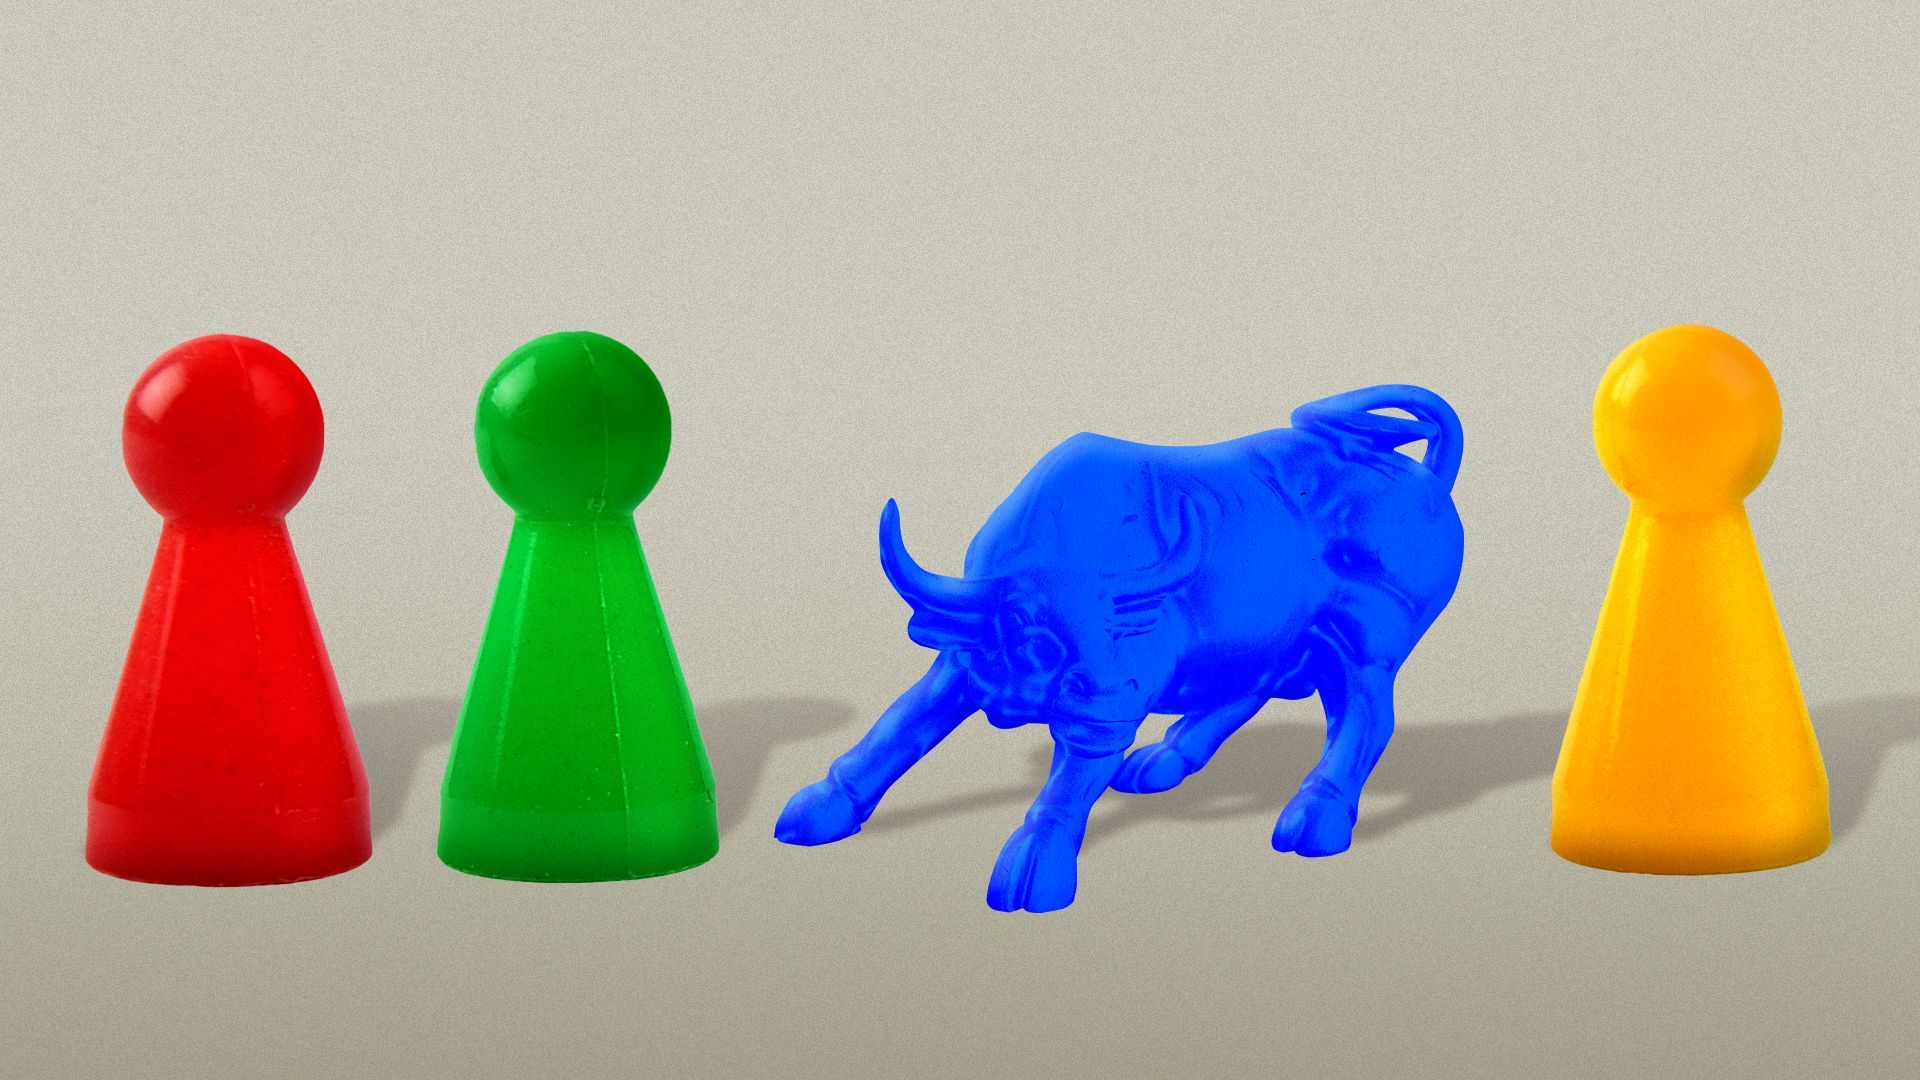 Illustration of a game piece in the shape of the Wall St. bull among other game pieces.